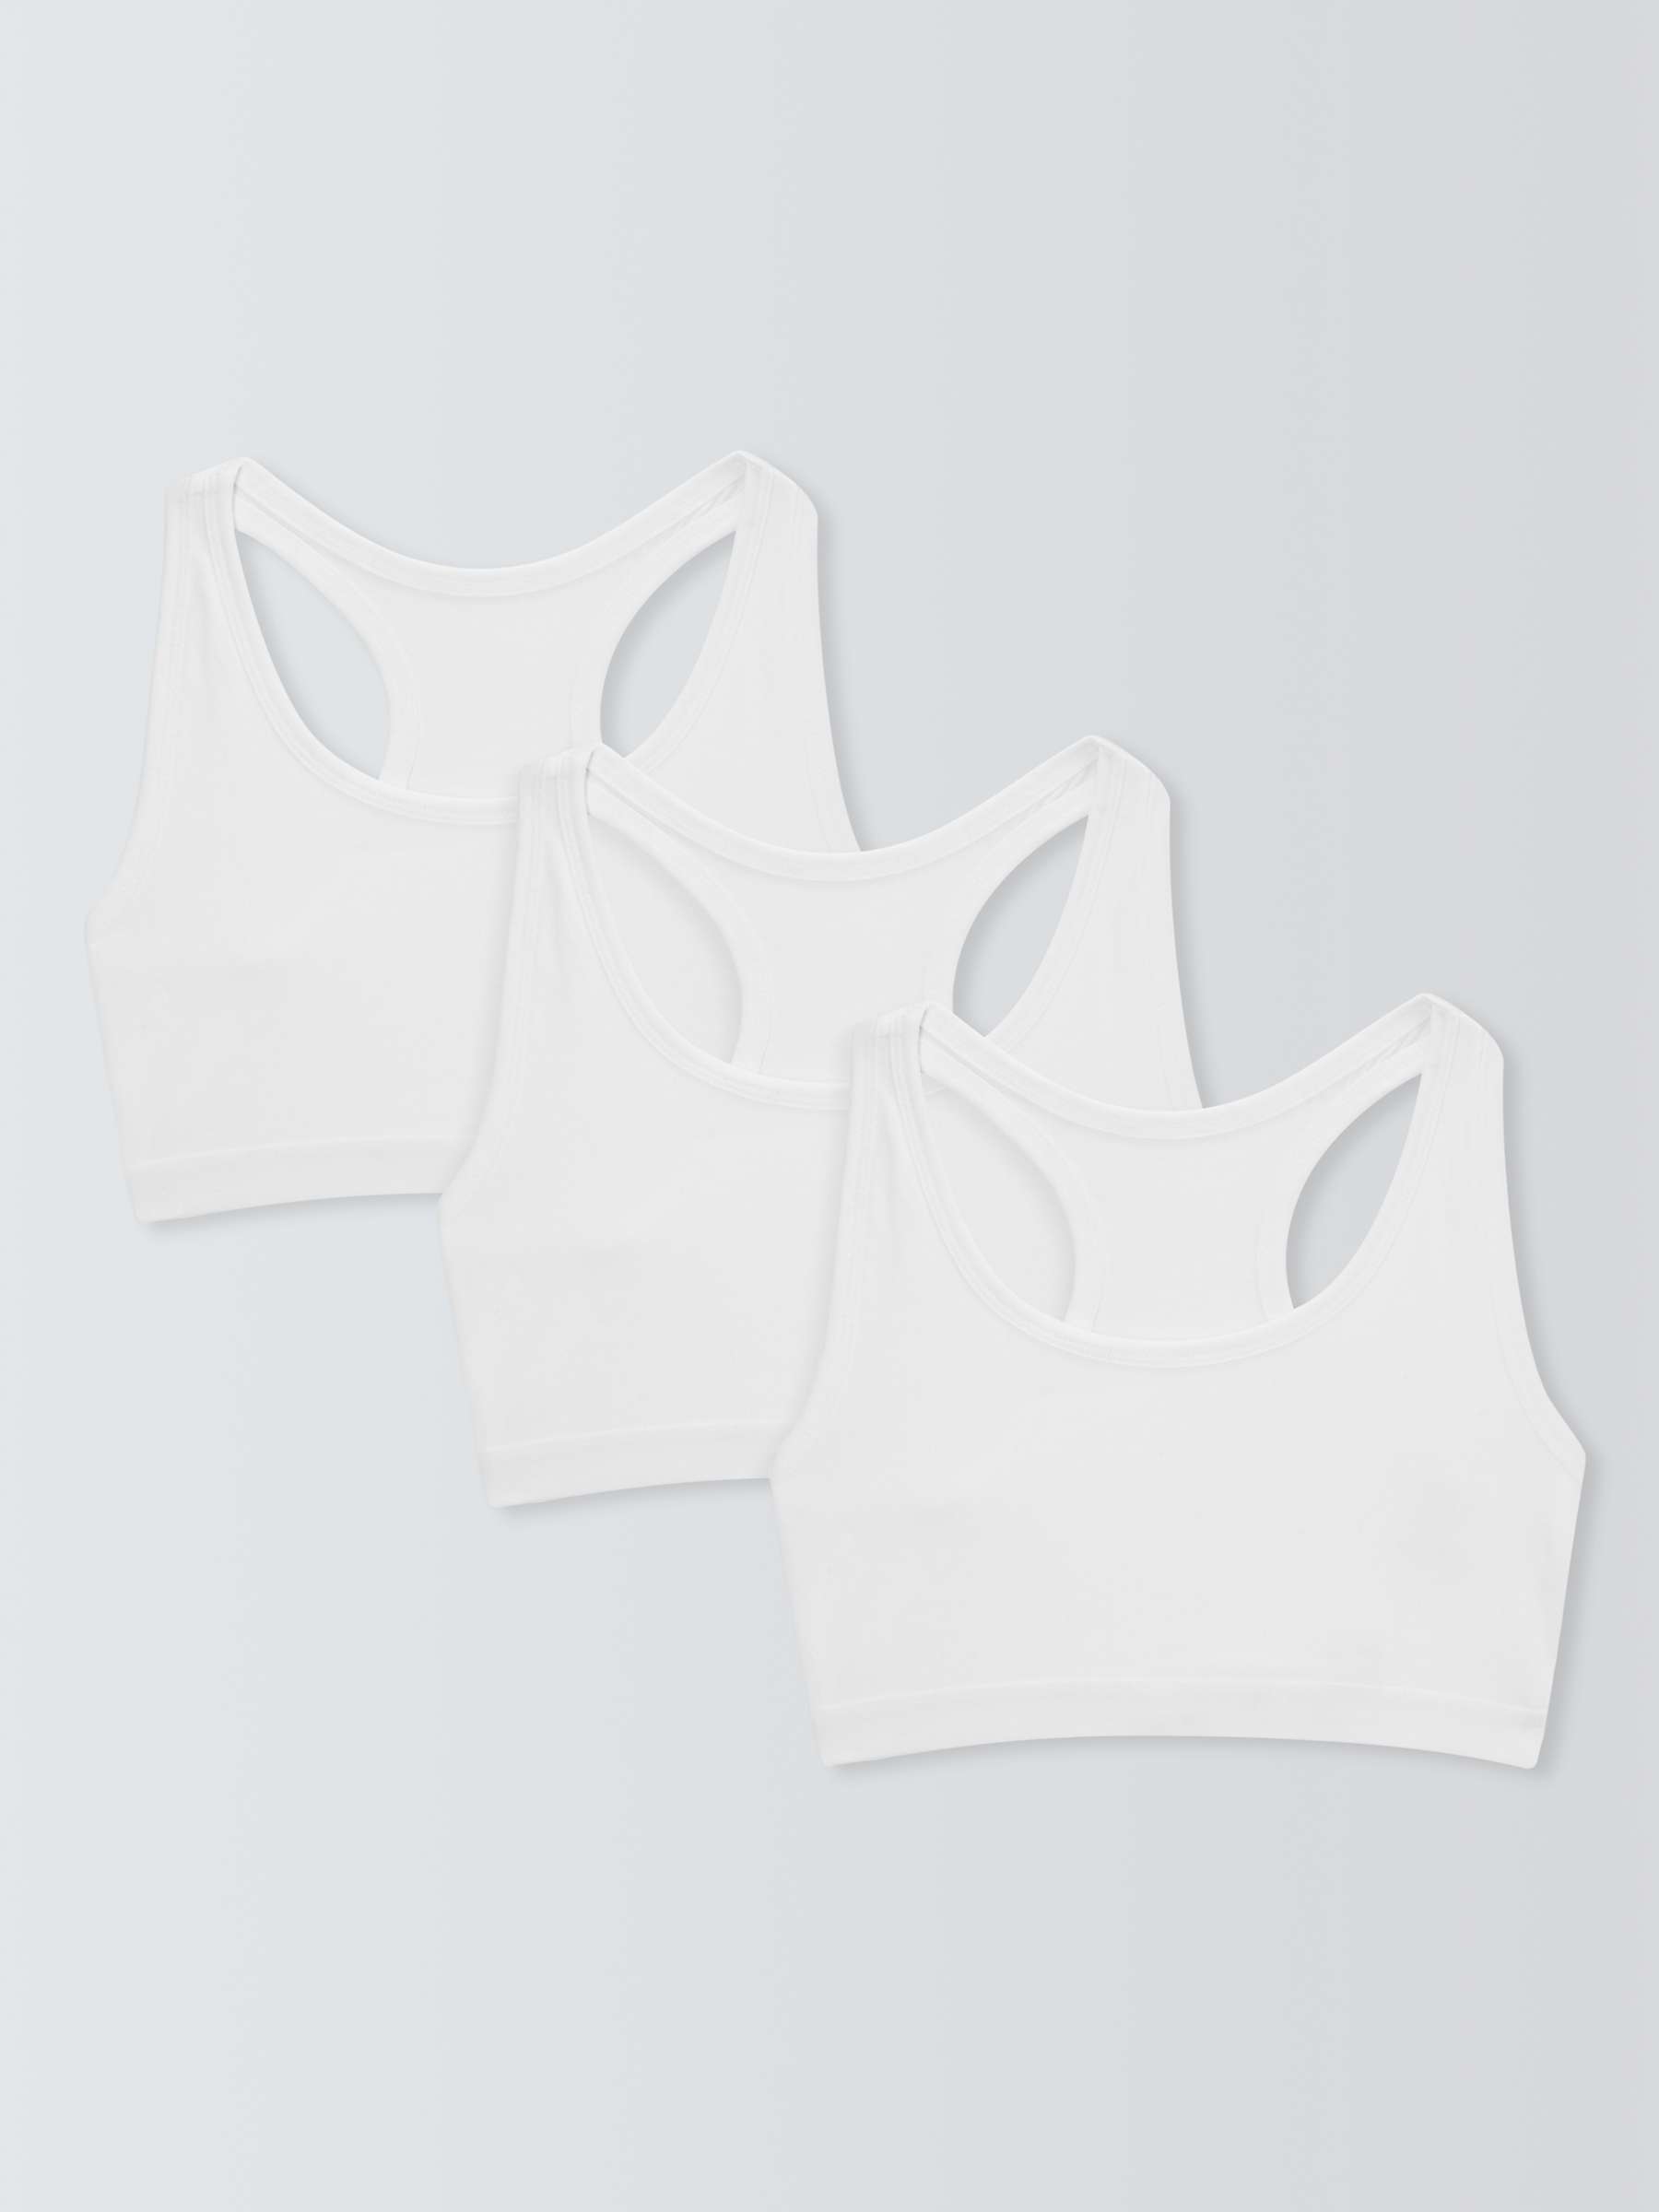 Buy John Lewis ANYDAY Girls' Sports Crop Tops, Pack of 3, White Online at johnlewis.com